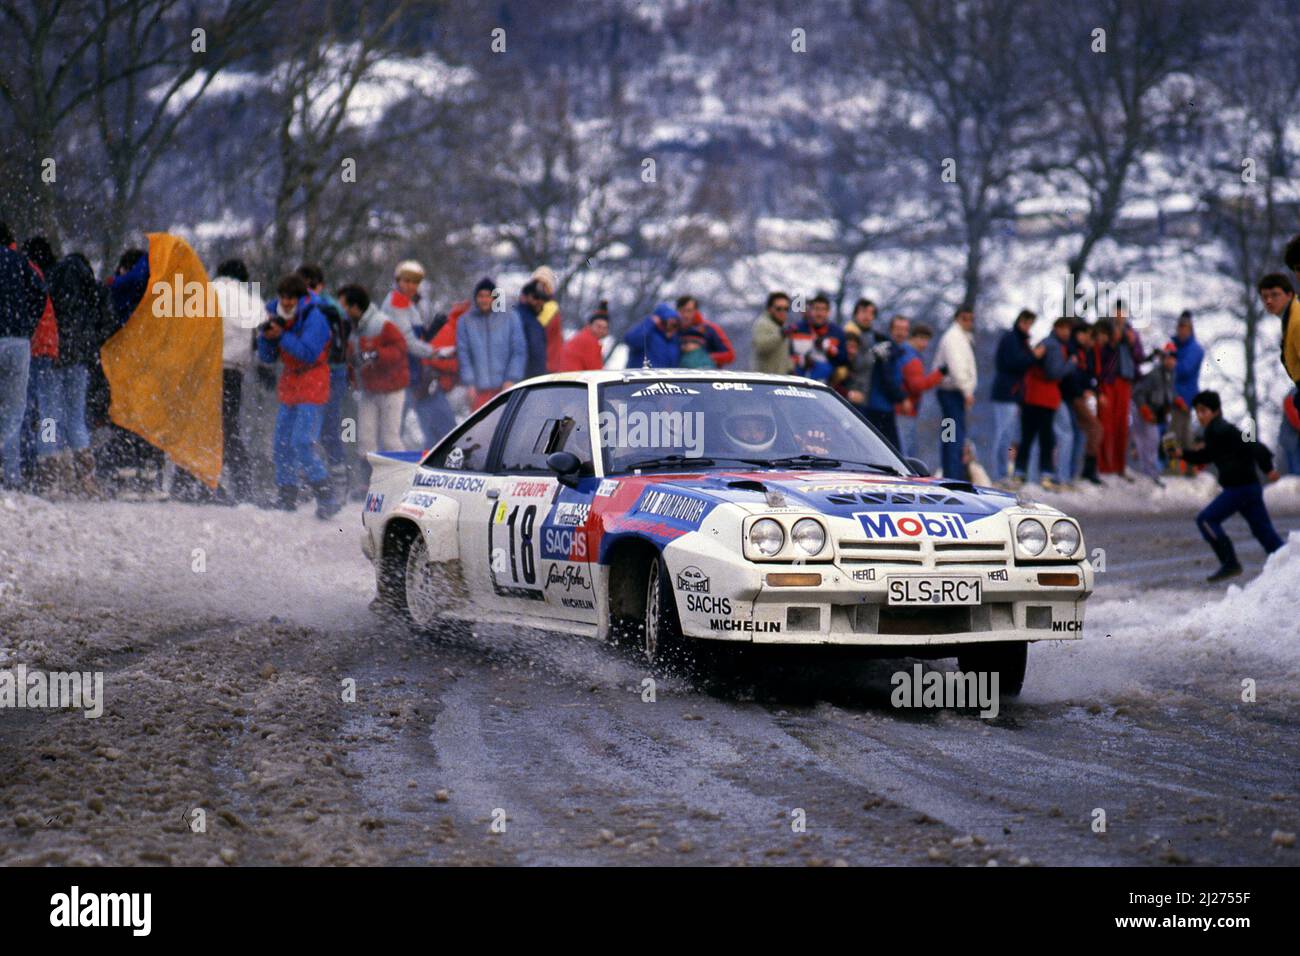 Manfred Hero (GER) Ludwig Grot (GER) Opel Manta 400 GRB Irmscher Banque D'Images